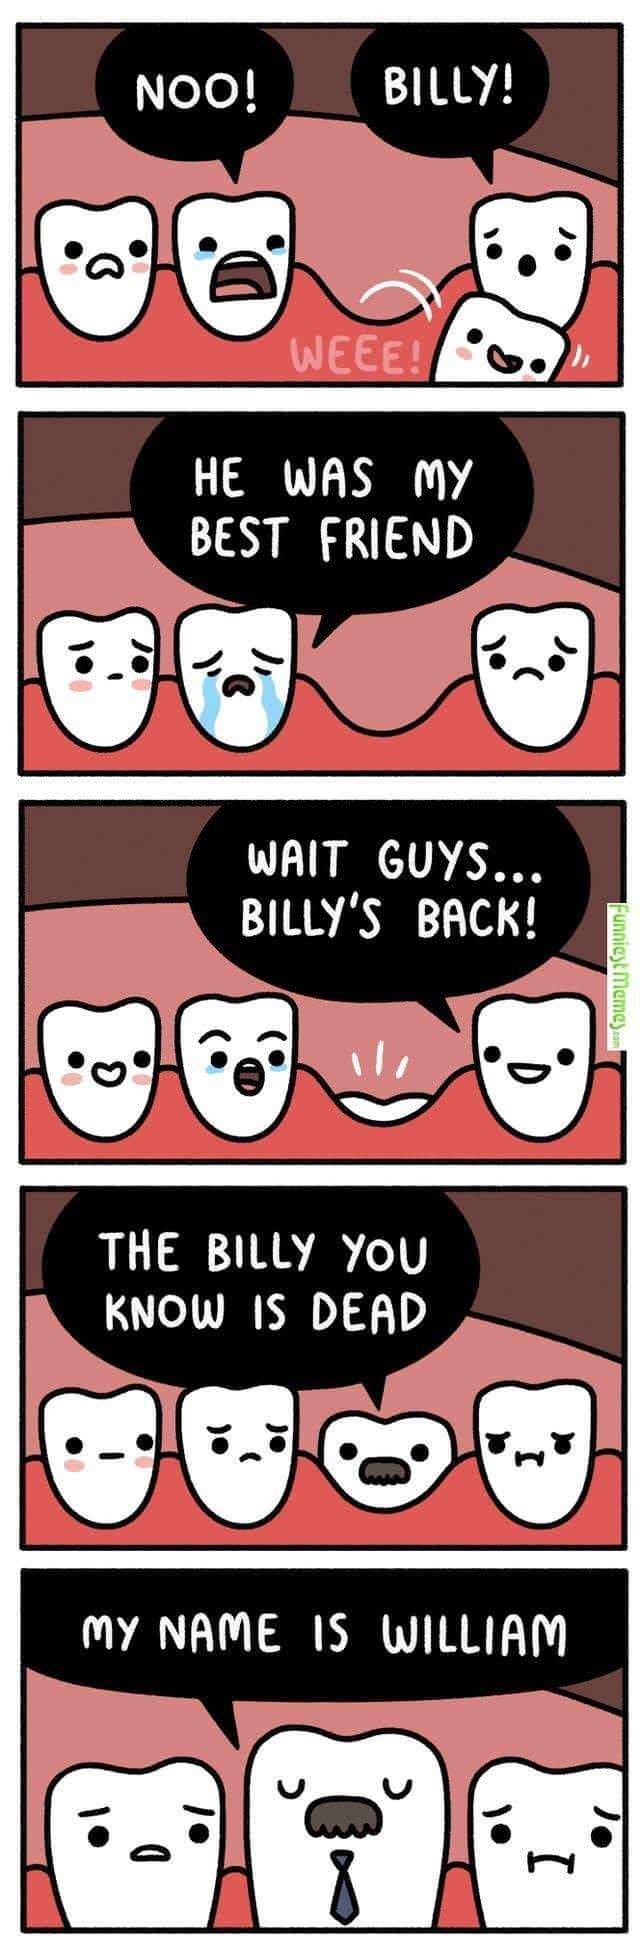 Comic about someone losing a tooth named Billy; the other teeth are sad but then Billy grows back as William"